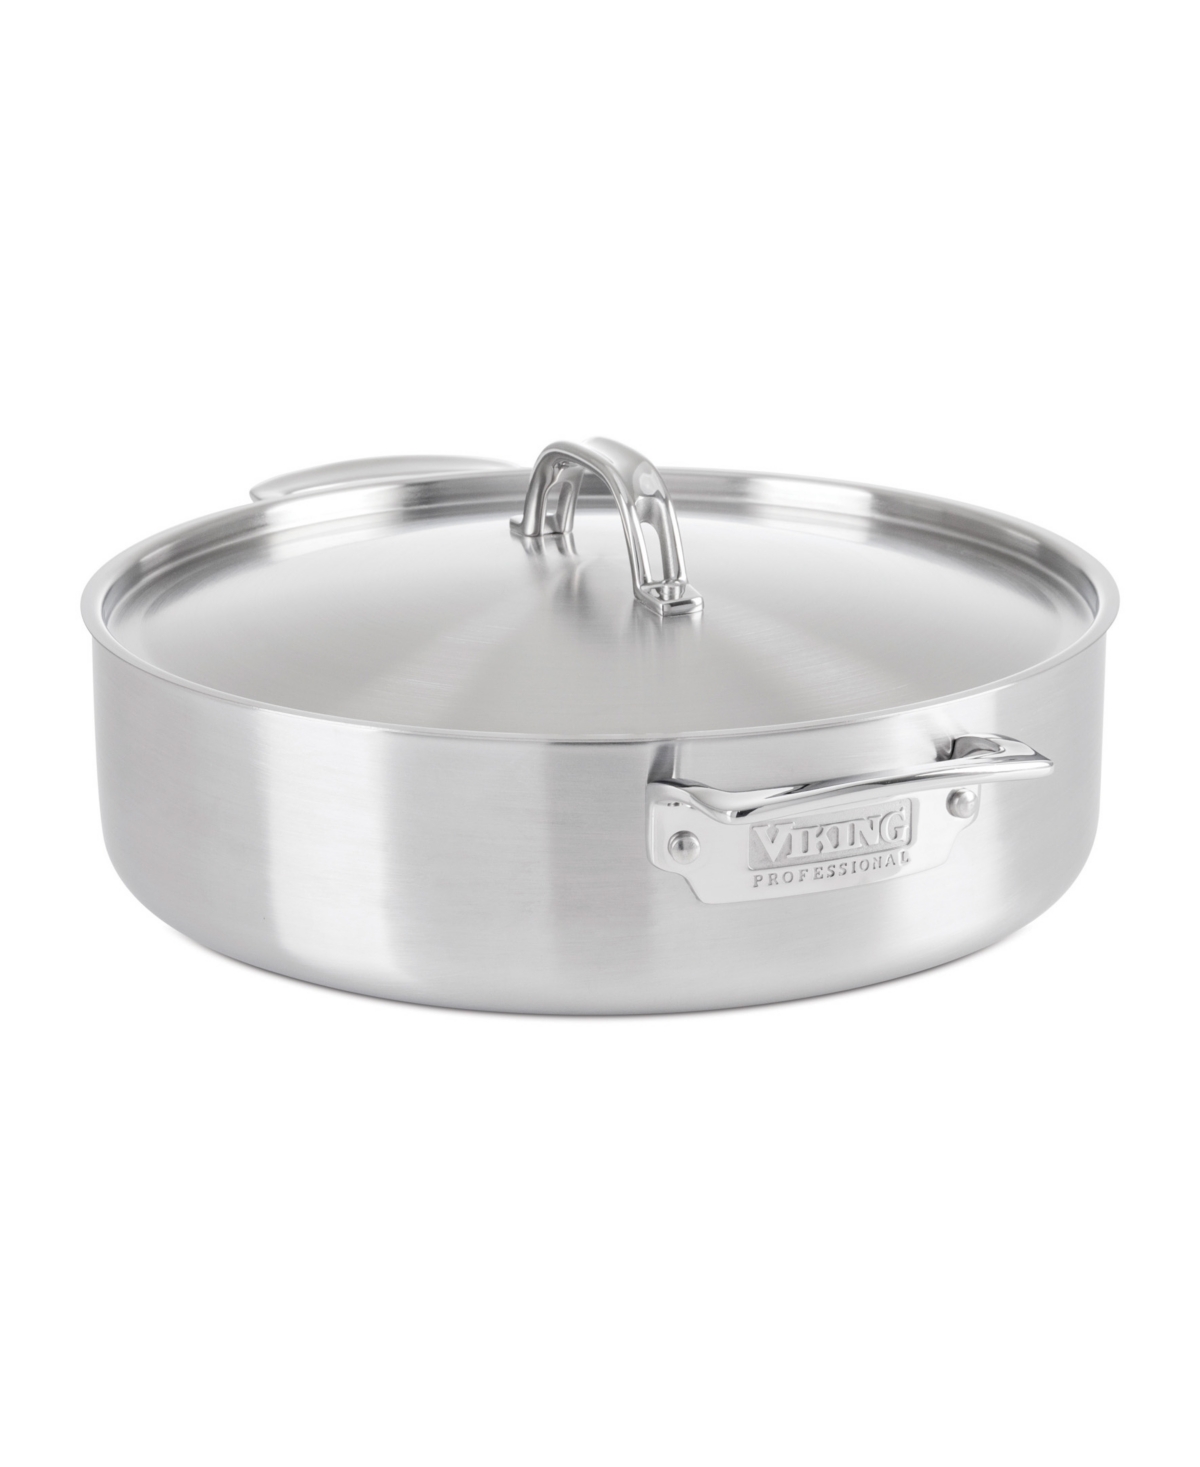 Viking Professional 5-ply Stainless Steel 6.4-quart Casserole Pan